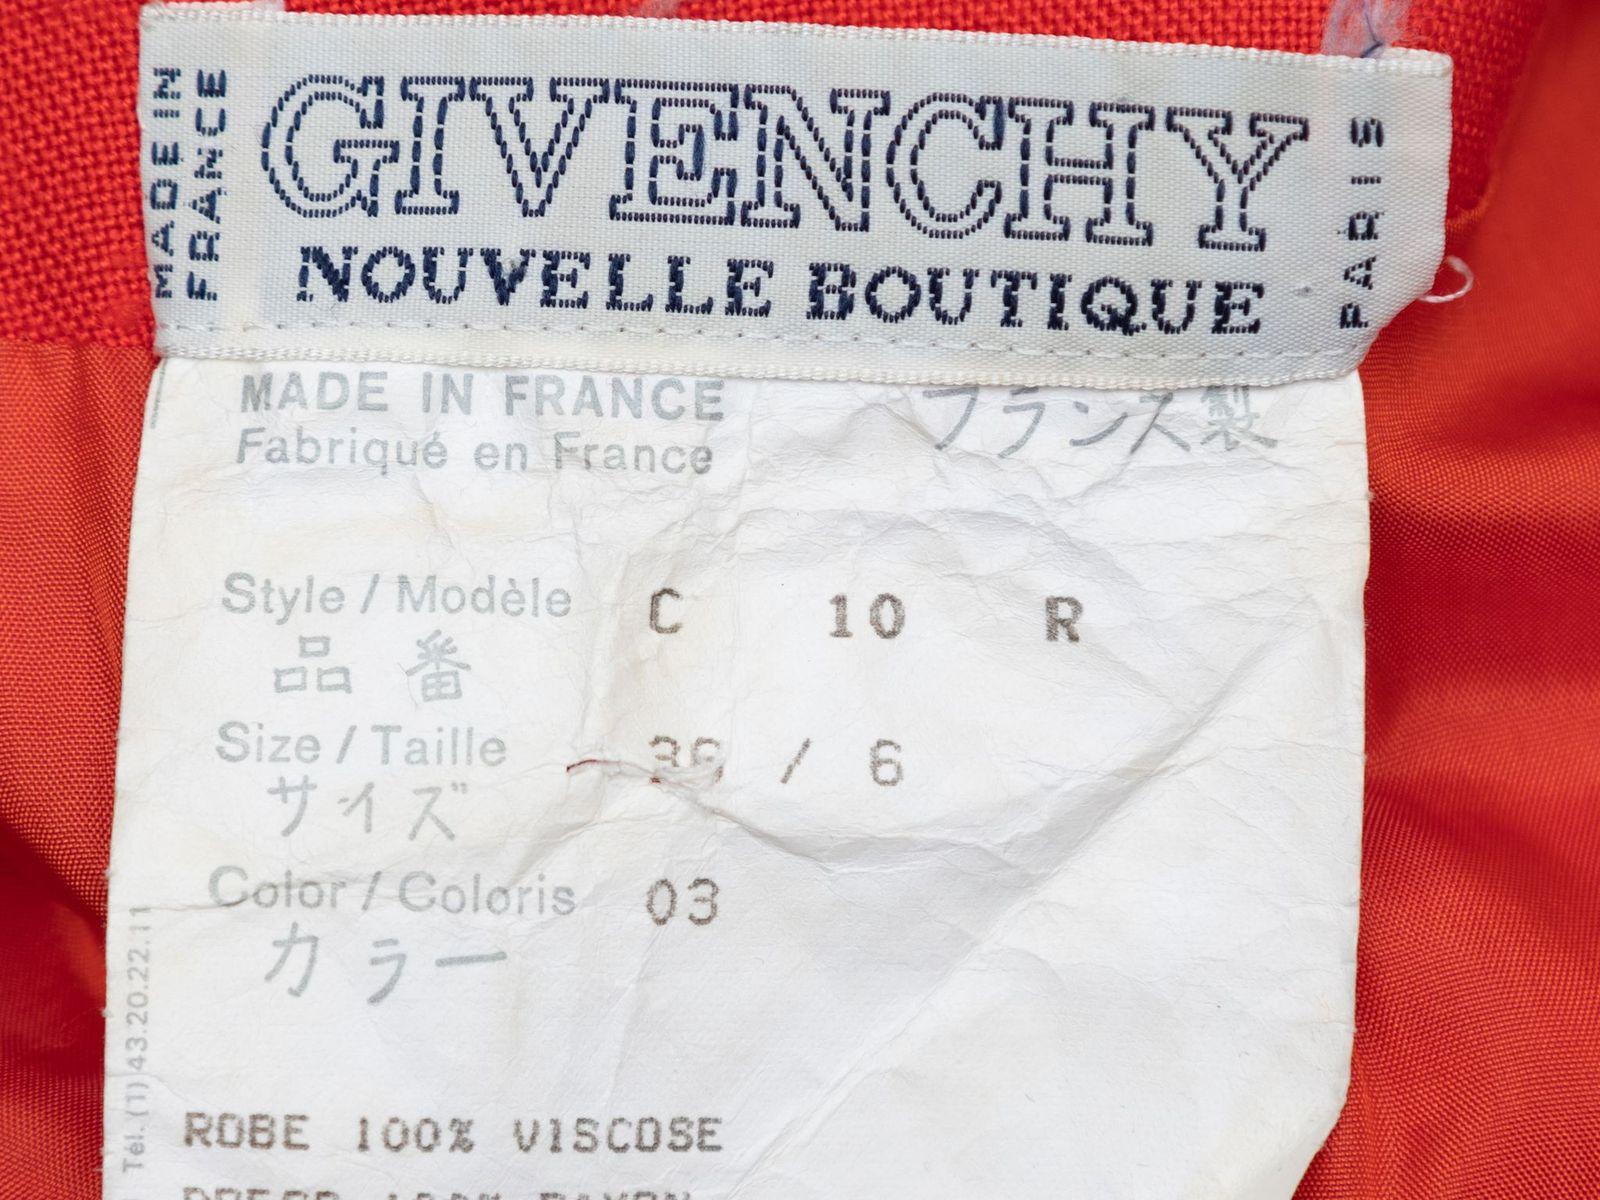 Product Details: Vintage red short sleeve dress by Givenchy. Notched collar. Gold-ton button closures at center front. 34